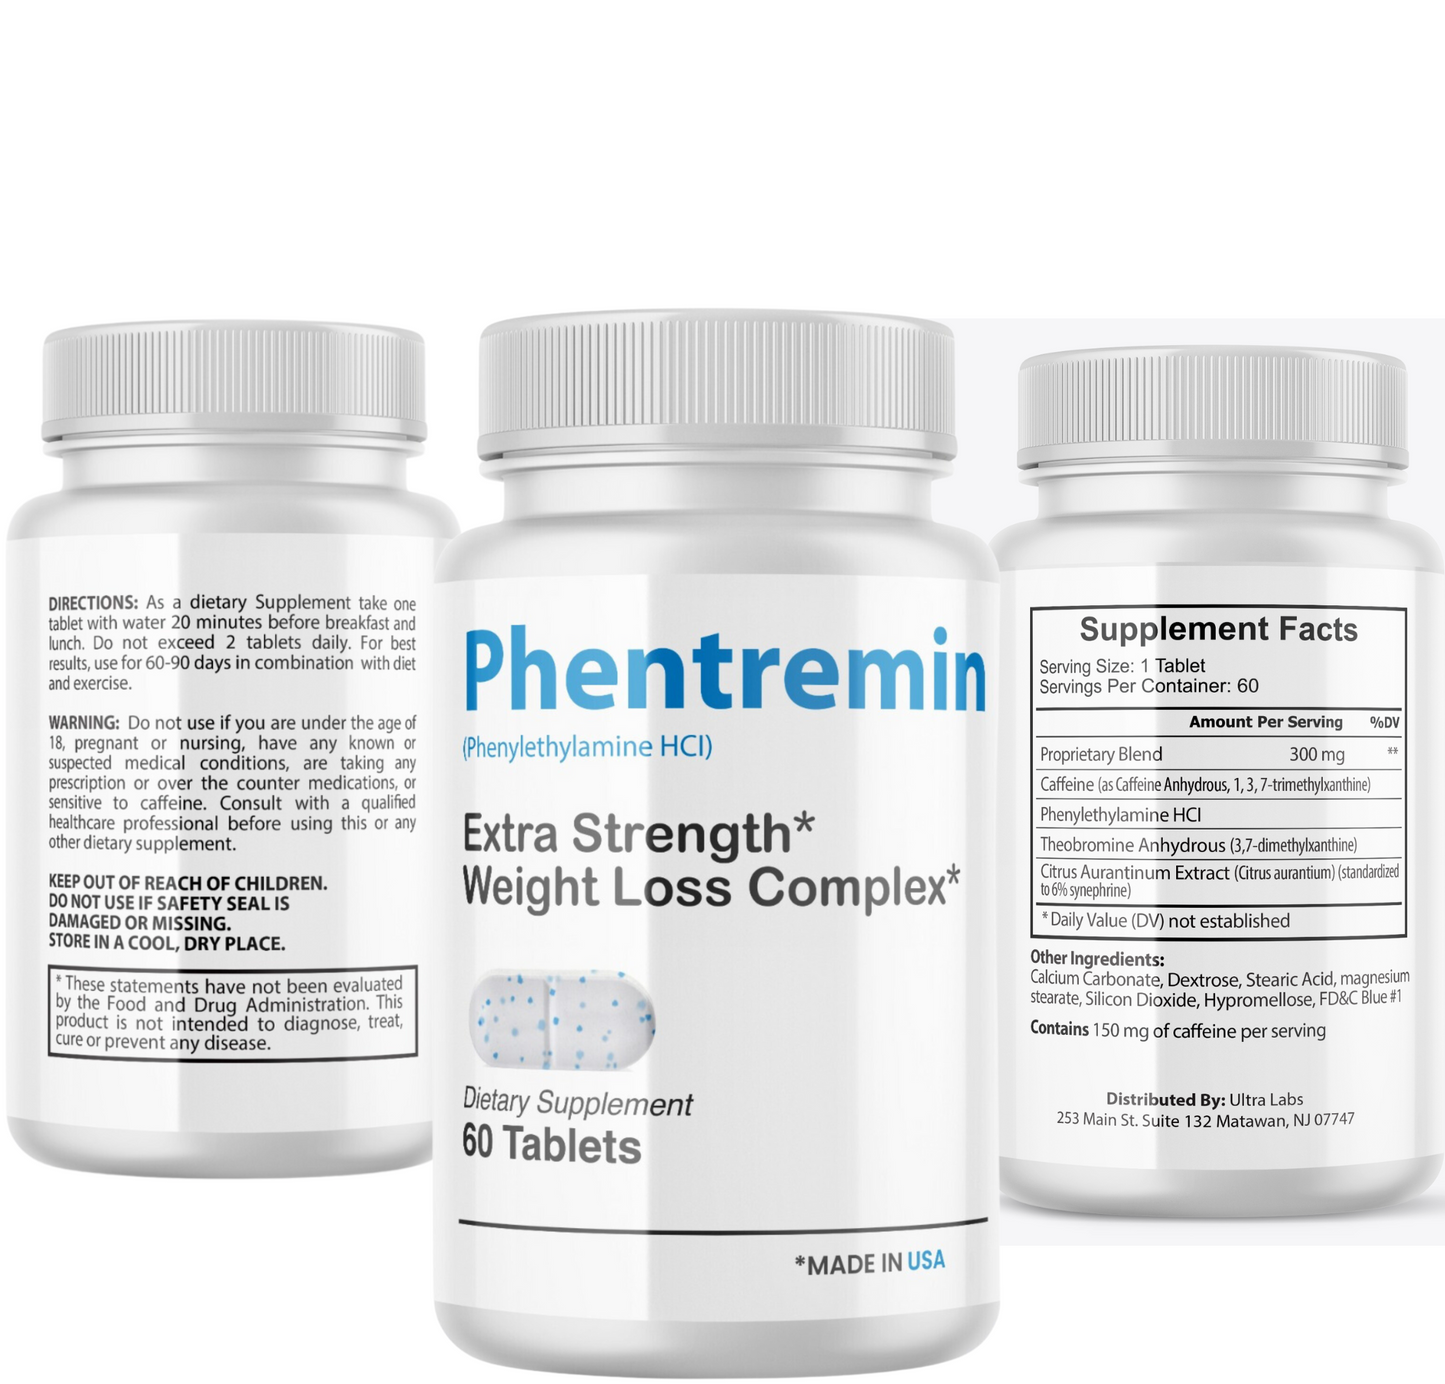 Phentremin - The Official Fat Burner - 2 Bottle Supply Professional Grade Ingredients